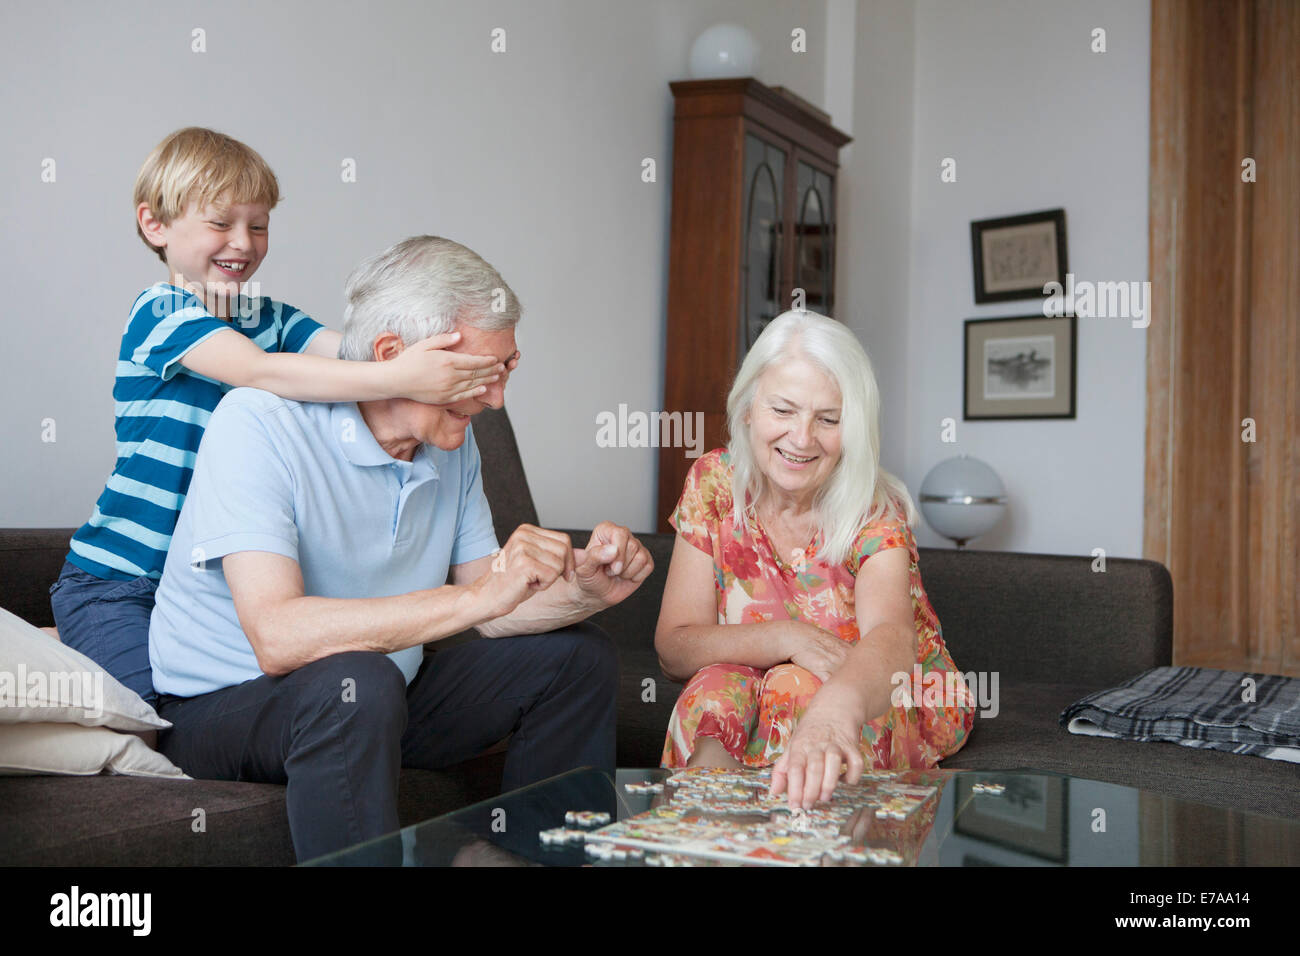 Boy covering grandfather's eyes while senior woman arranging jigsaw puzzle at table in living room Stock Photo